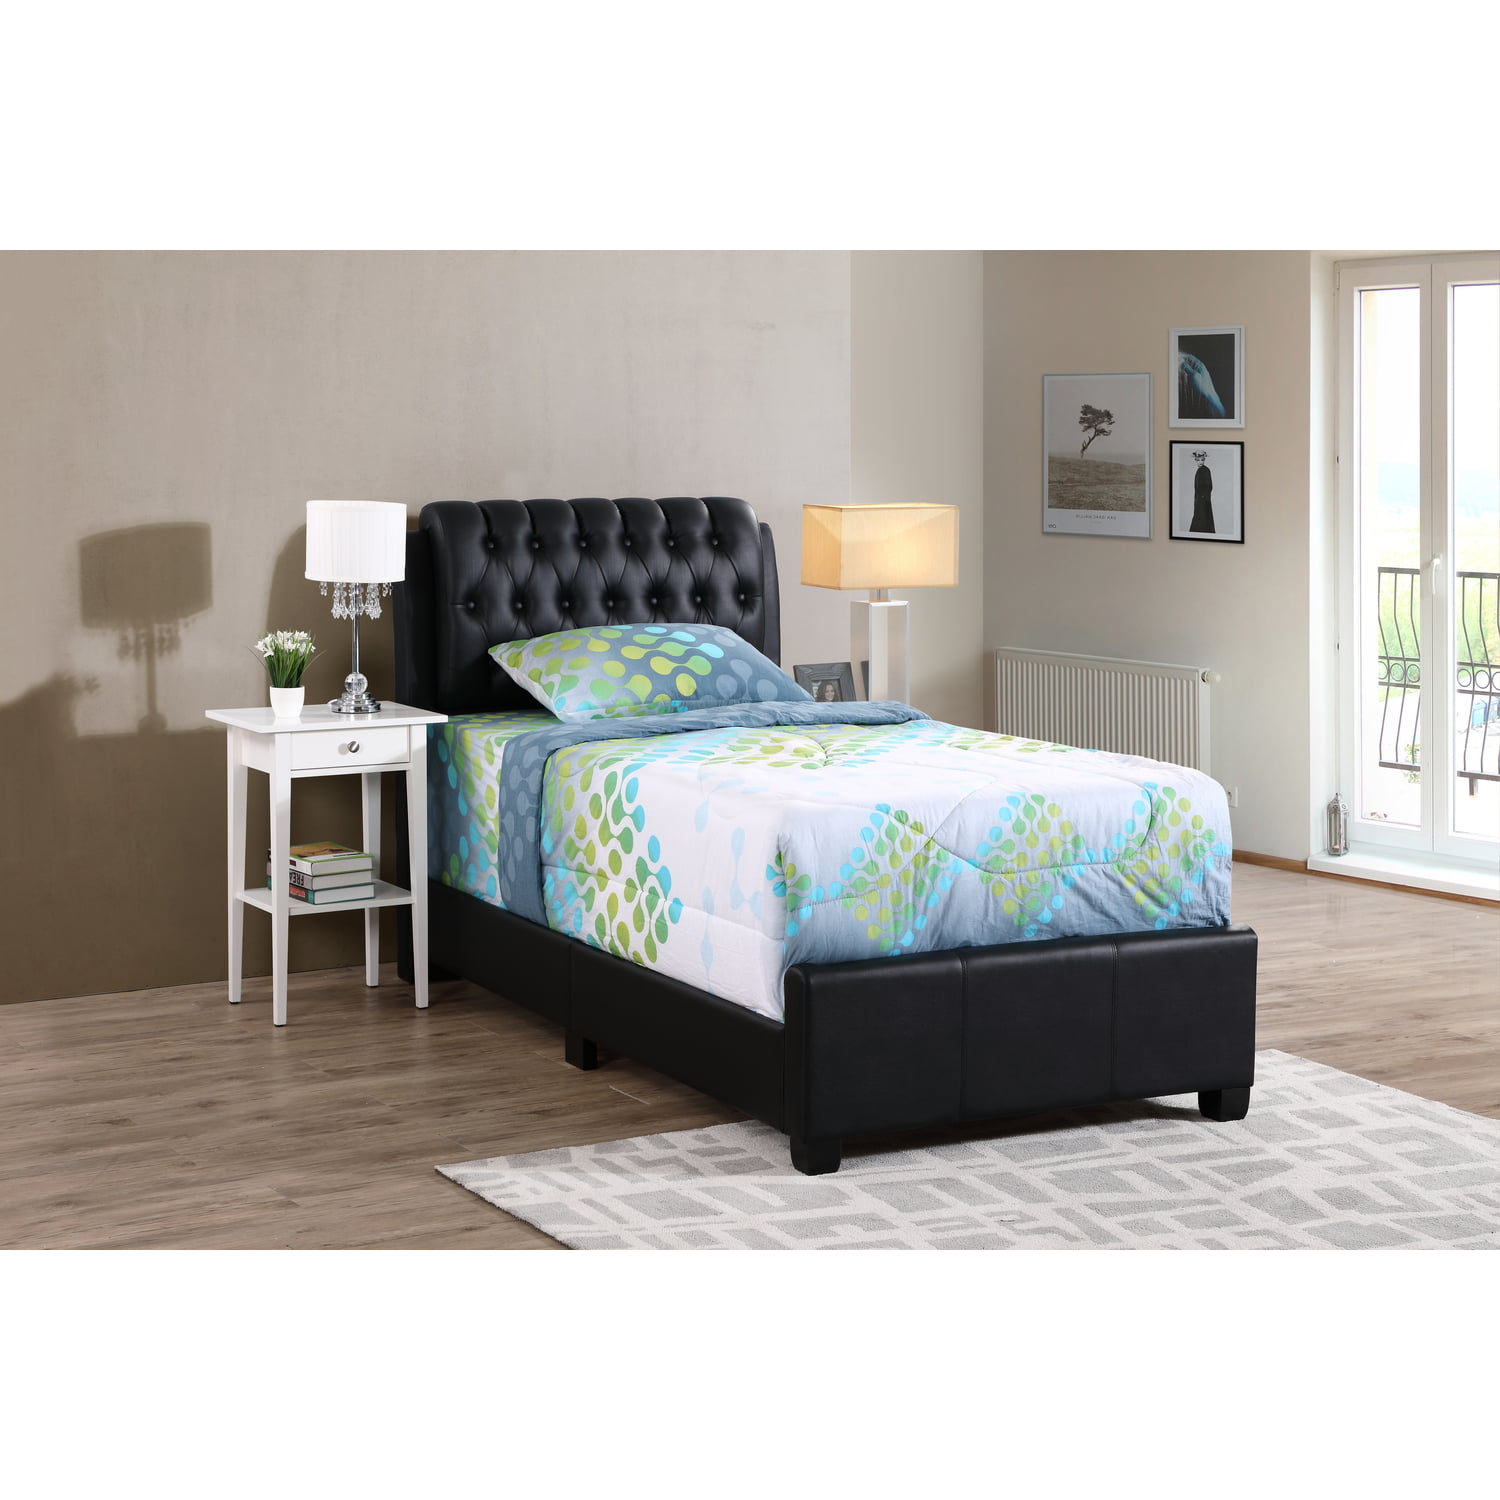 Glory Furniture Marilla G1500c Tb Up, Black Upholstered Twin Bed With Storage